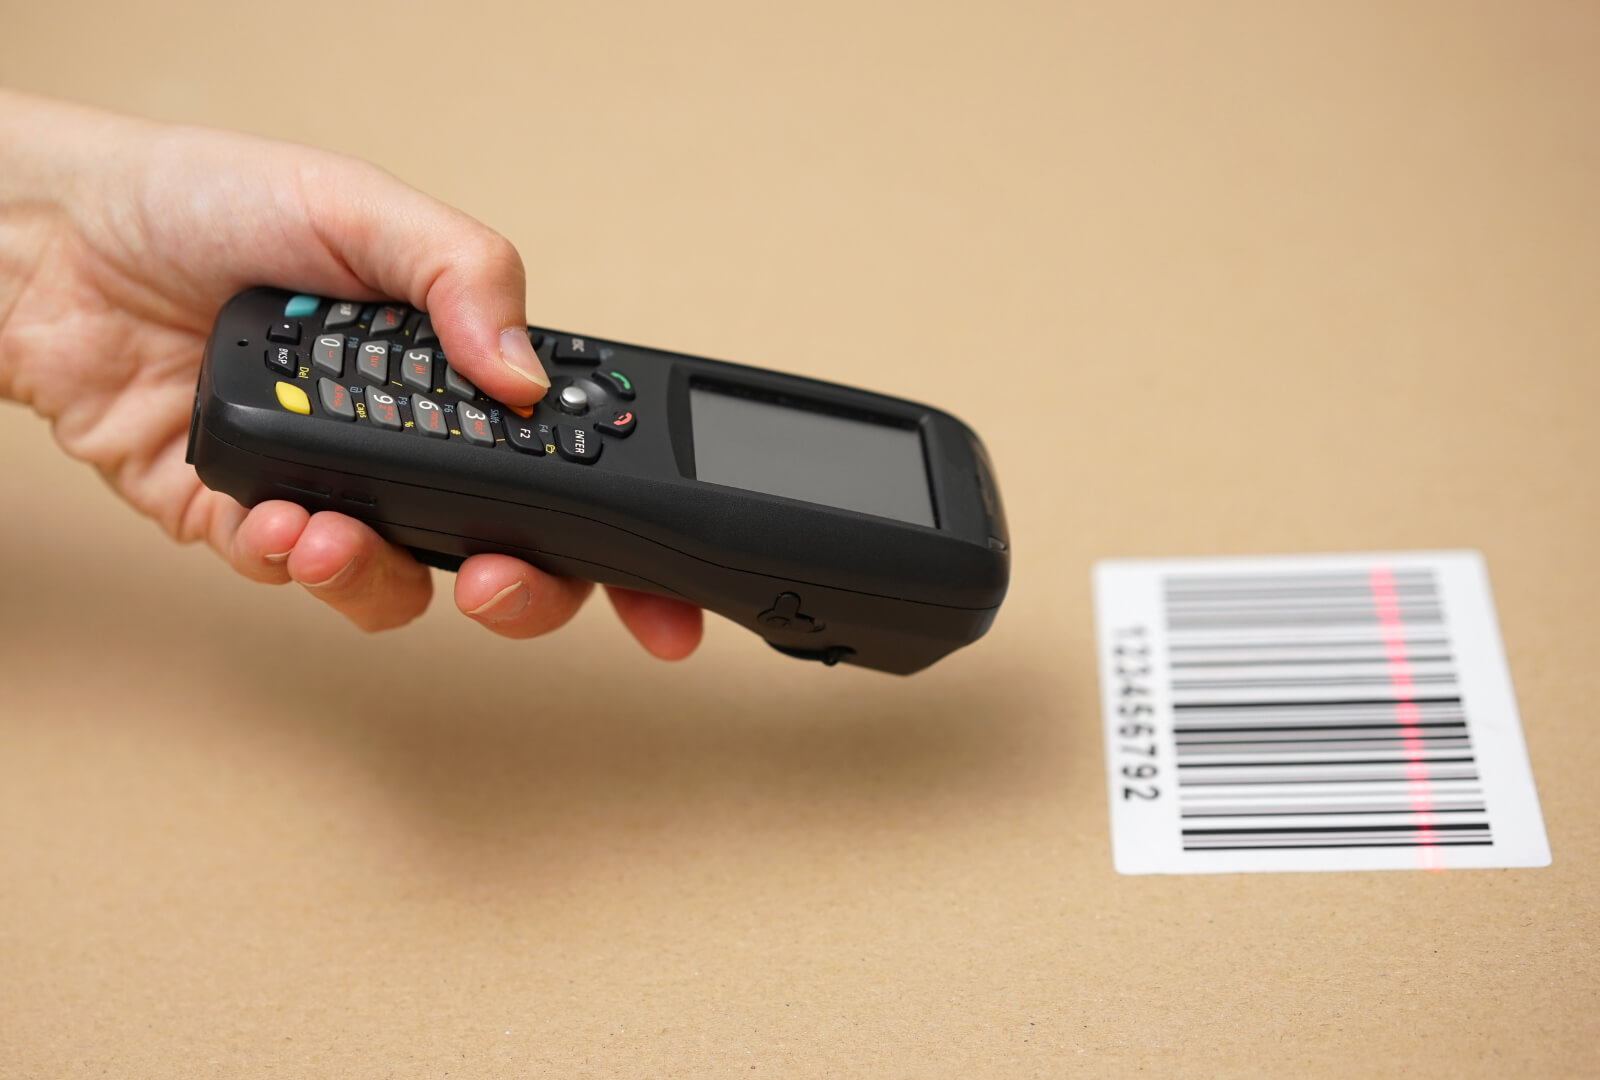 barcode scanners